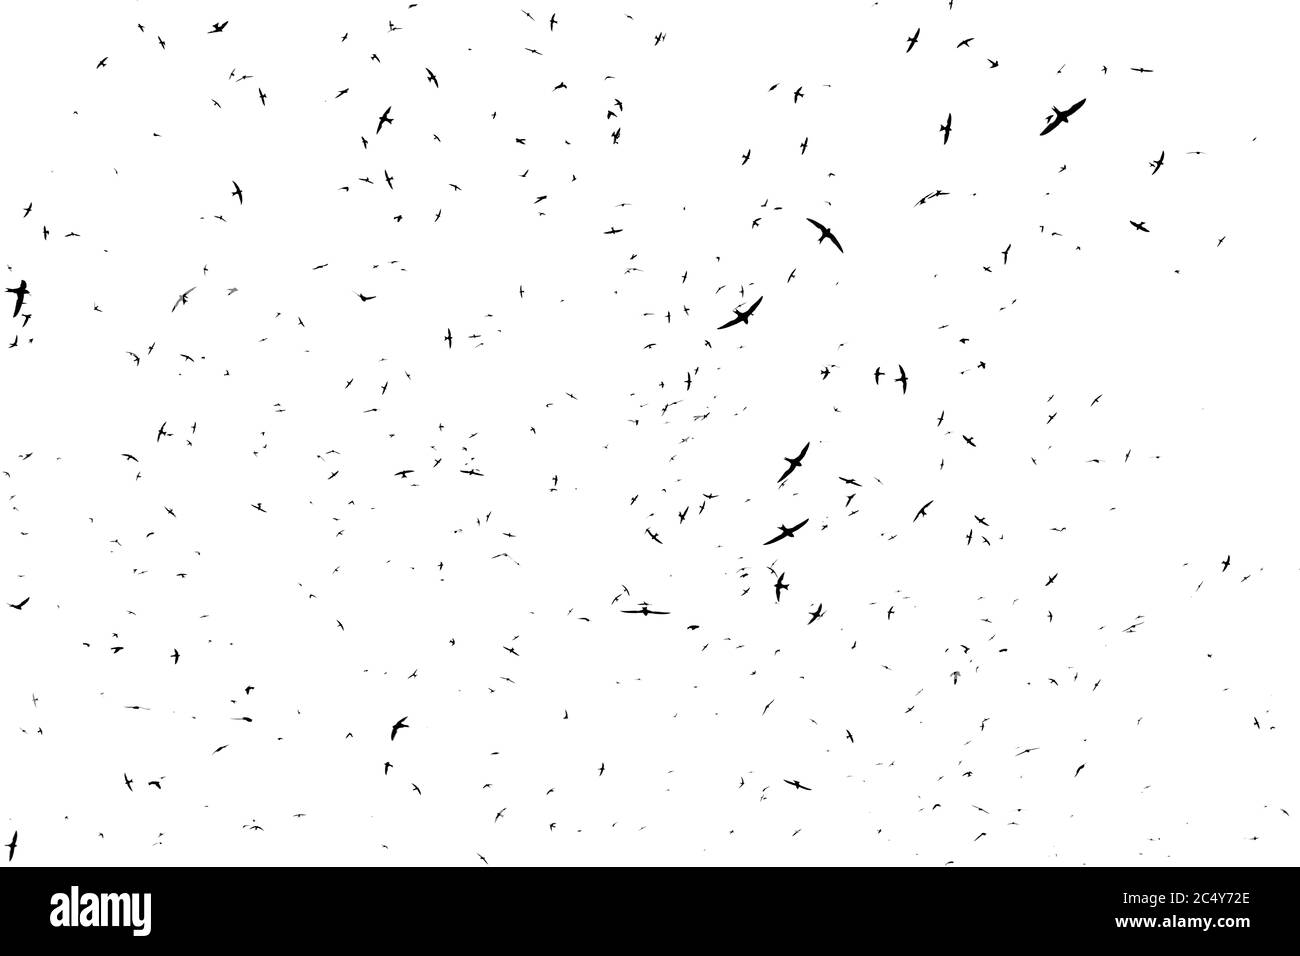 Flock of birds. Swifts arrived. outlines of birds on a white background. Stock Photo